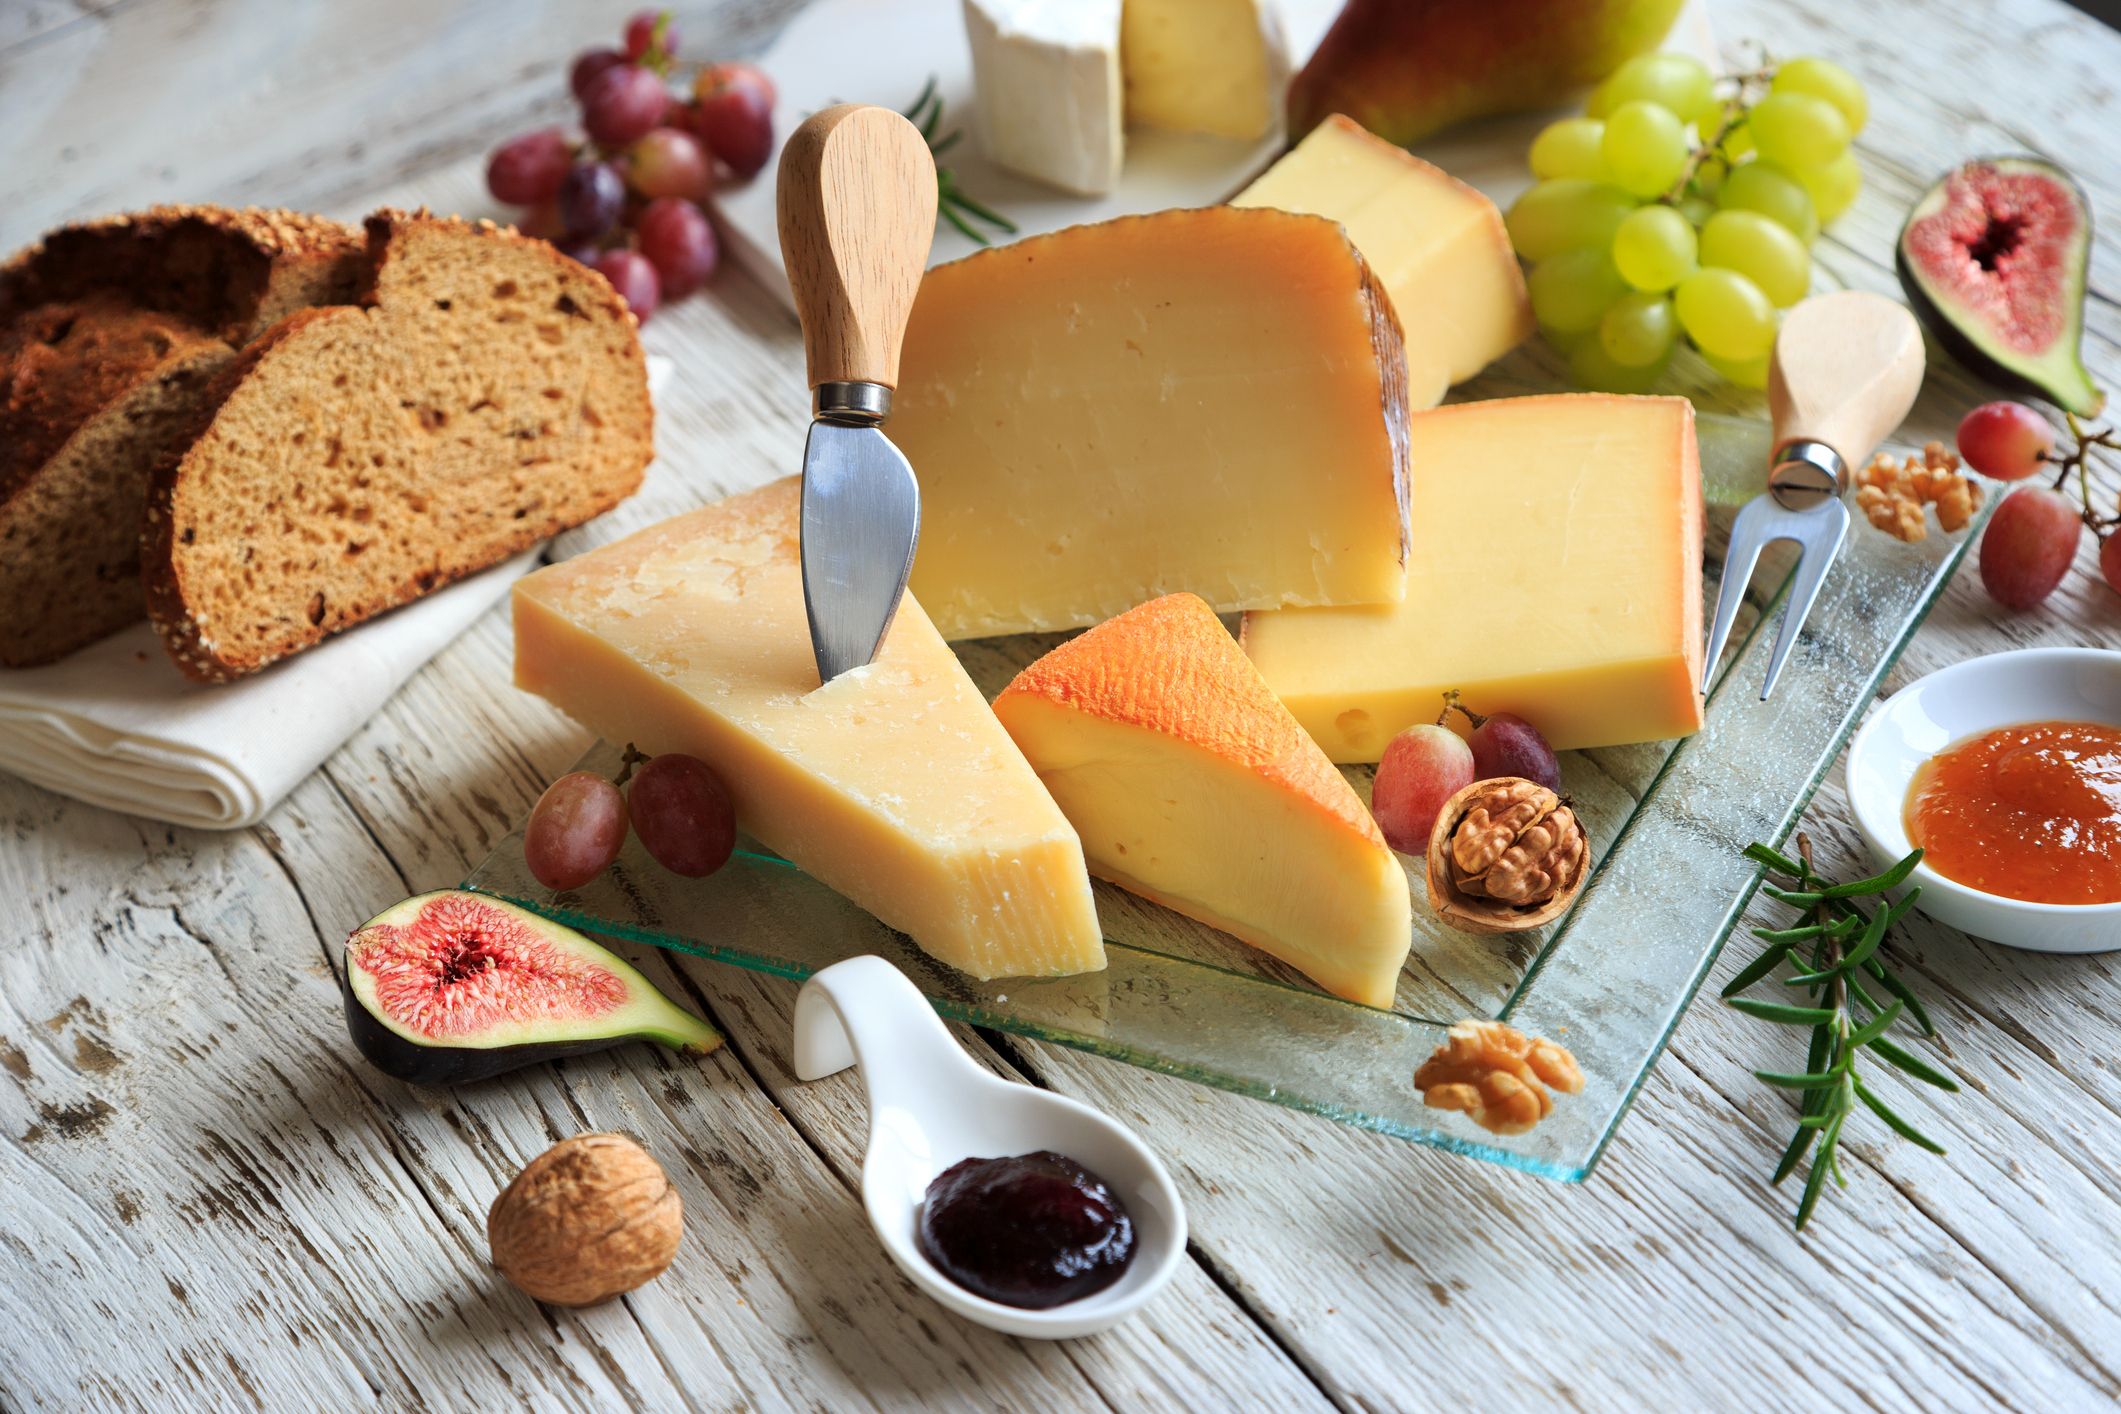 Cheese Fans, How Many Different Types Have You Tried?